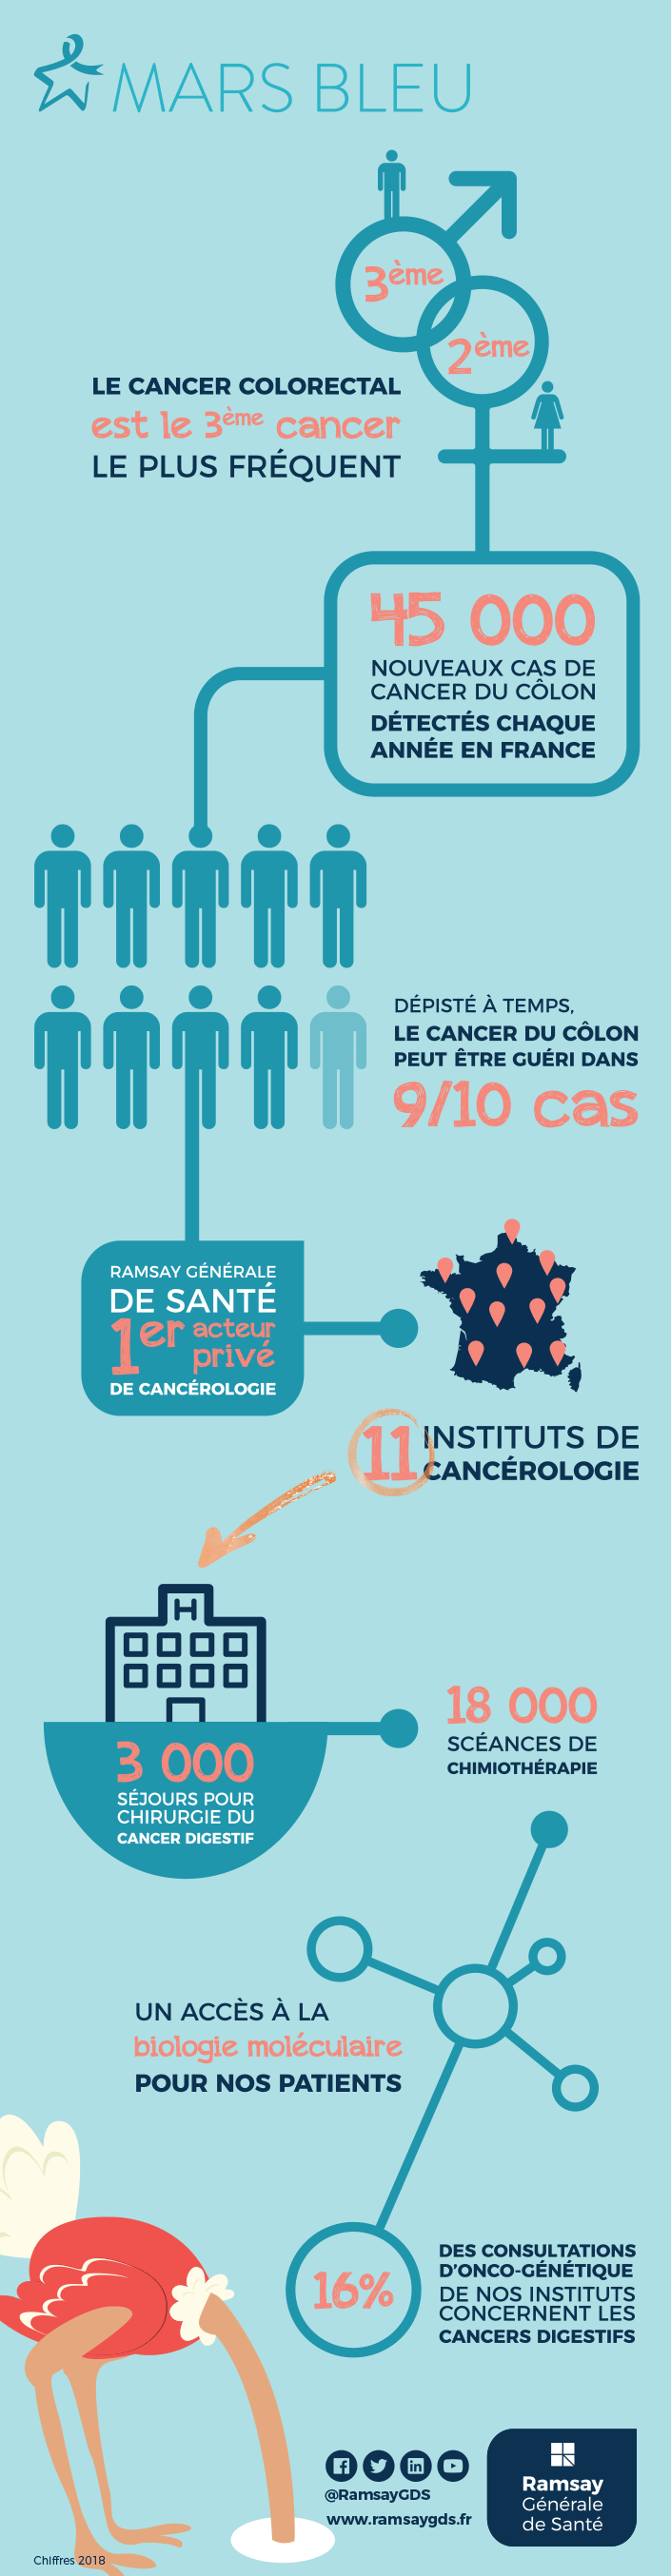 Infographie - Cancer colorectal